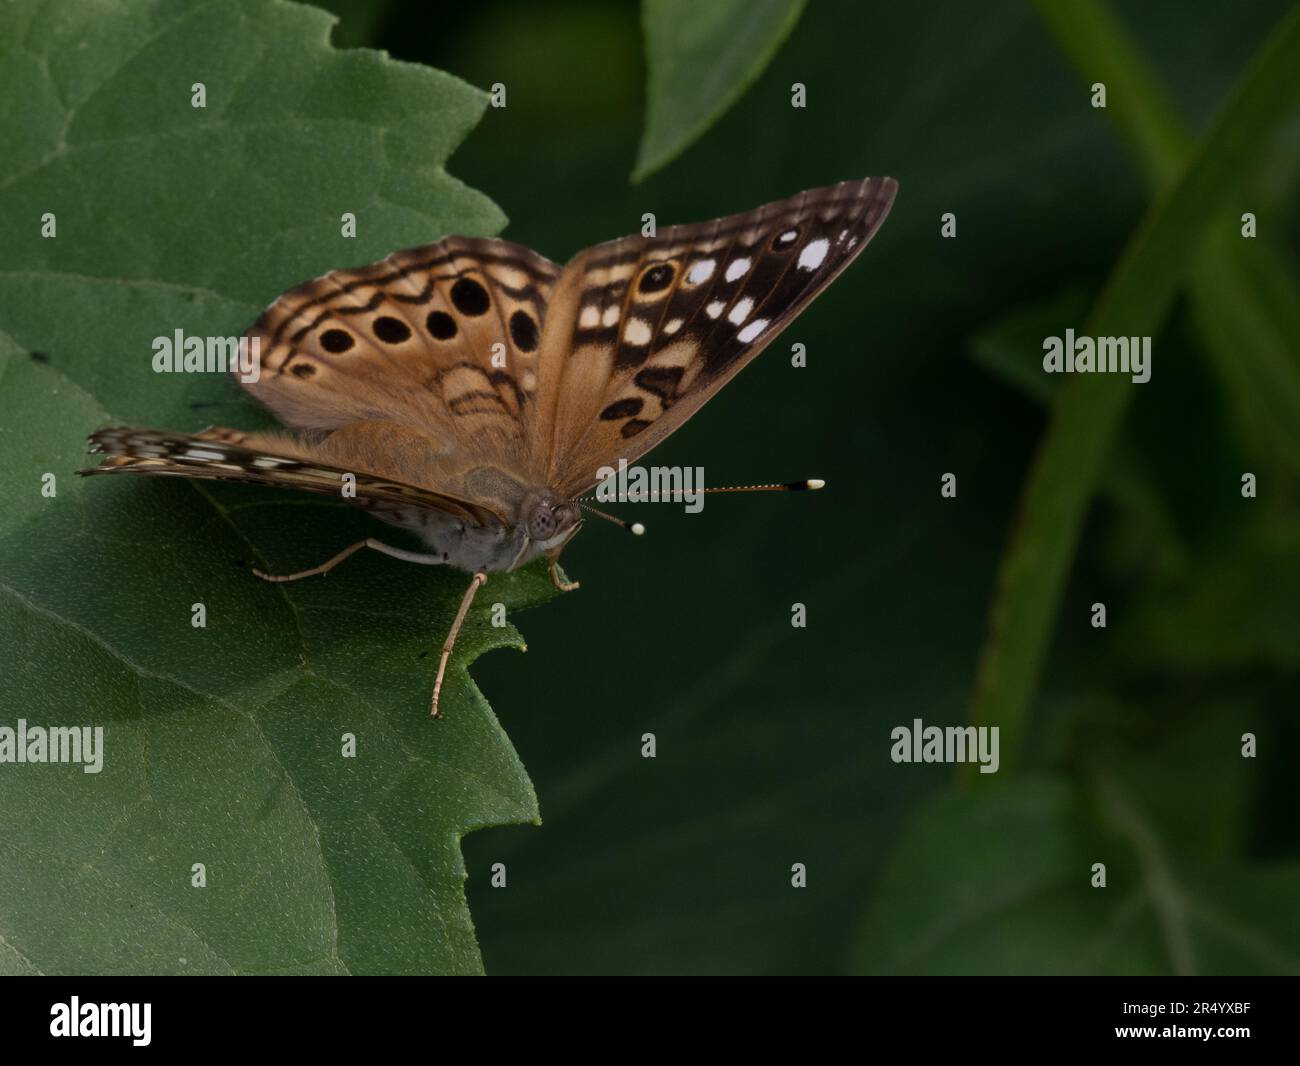 Hackberry emperor butterfly perched on a green leaf in Austin, Texas. Photographed with a shallow depth of field. Stock Photo